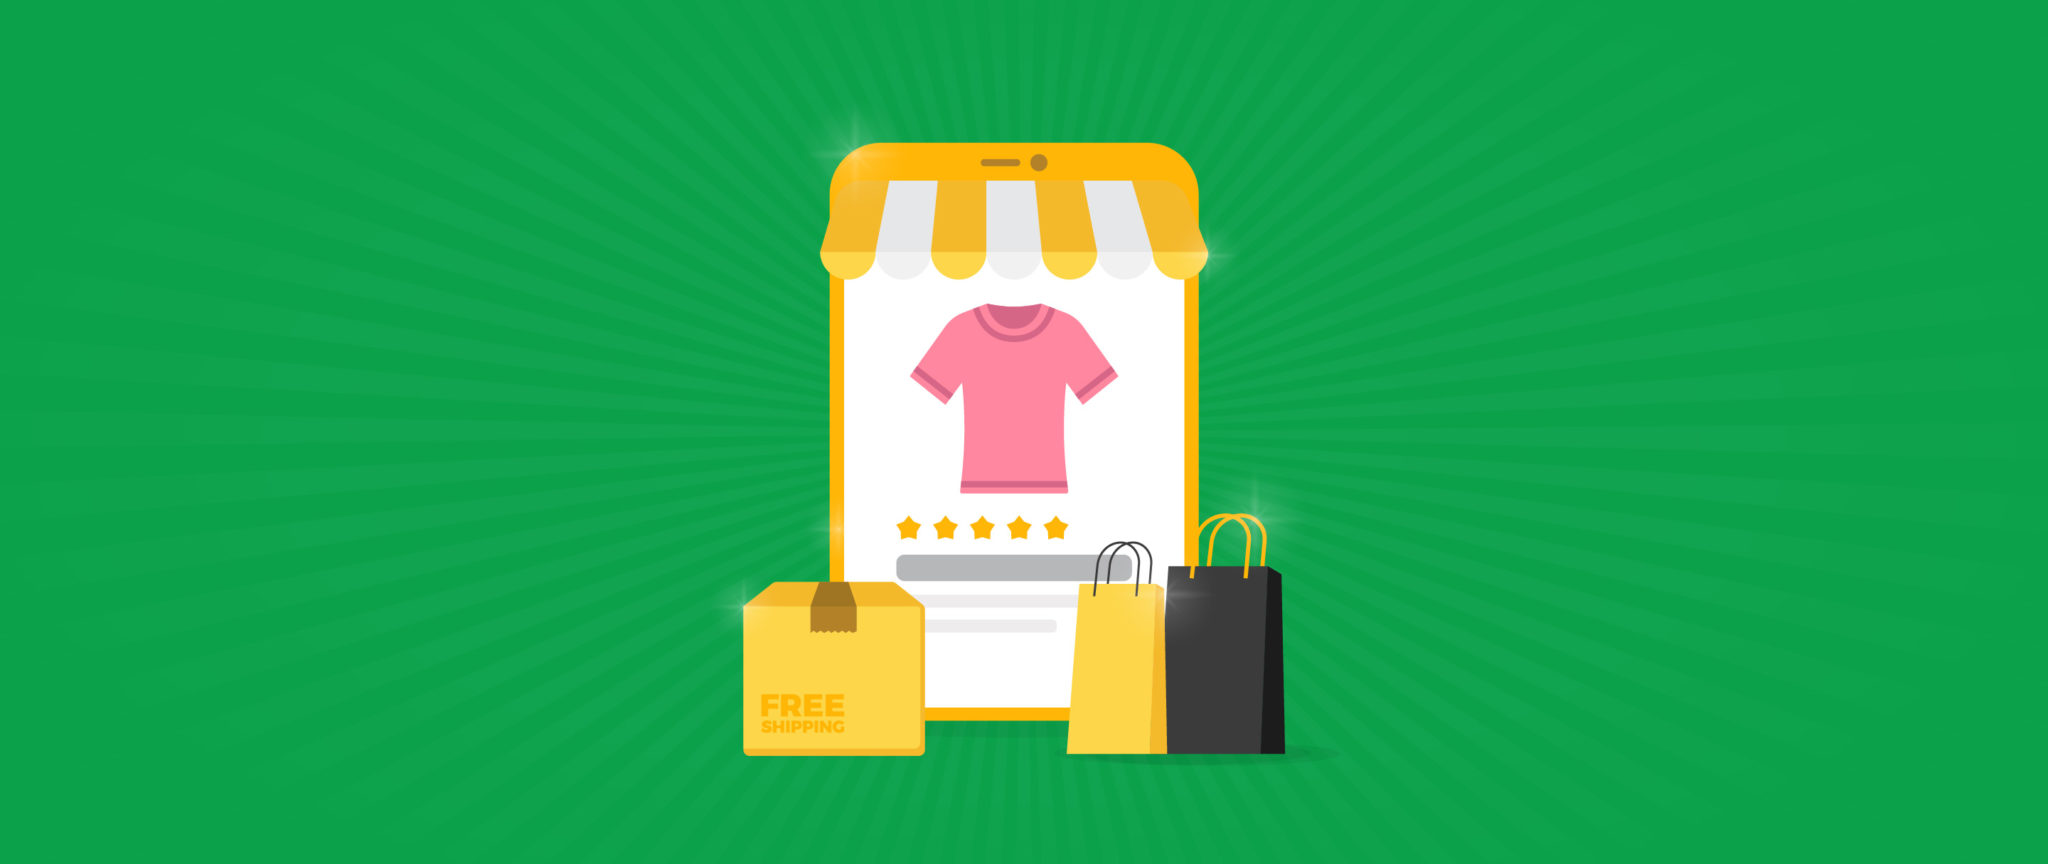 A pink shirt is prominently displayed on a smartphone that is surrounded by two shopping bags and one cardboard shipping box.